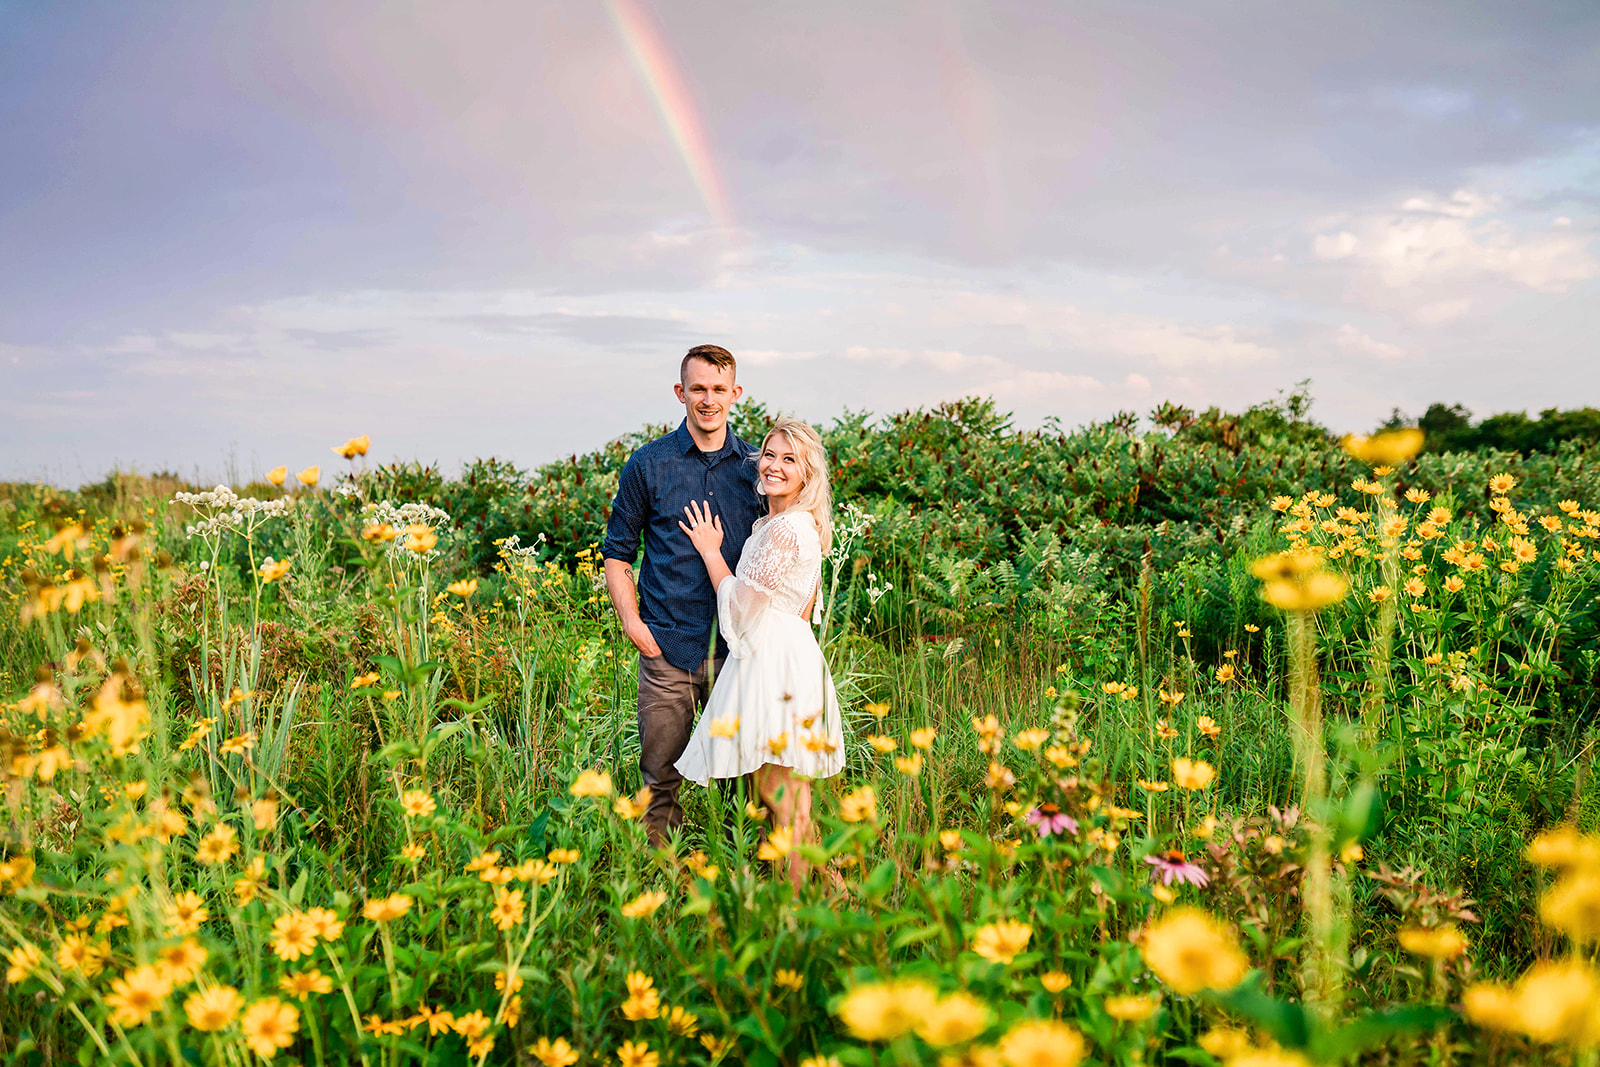 A joyful engaged couple smiles at the camera under a vibrant rainbow in a lush flower field.